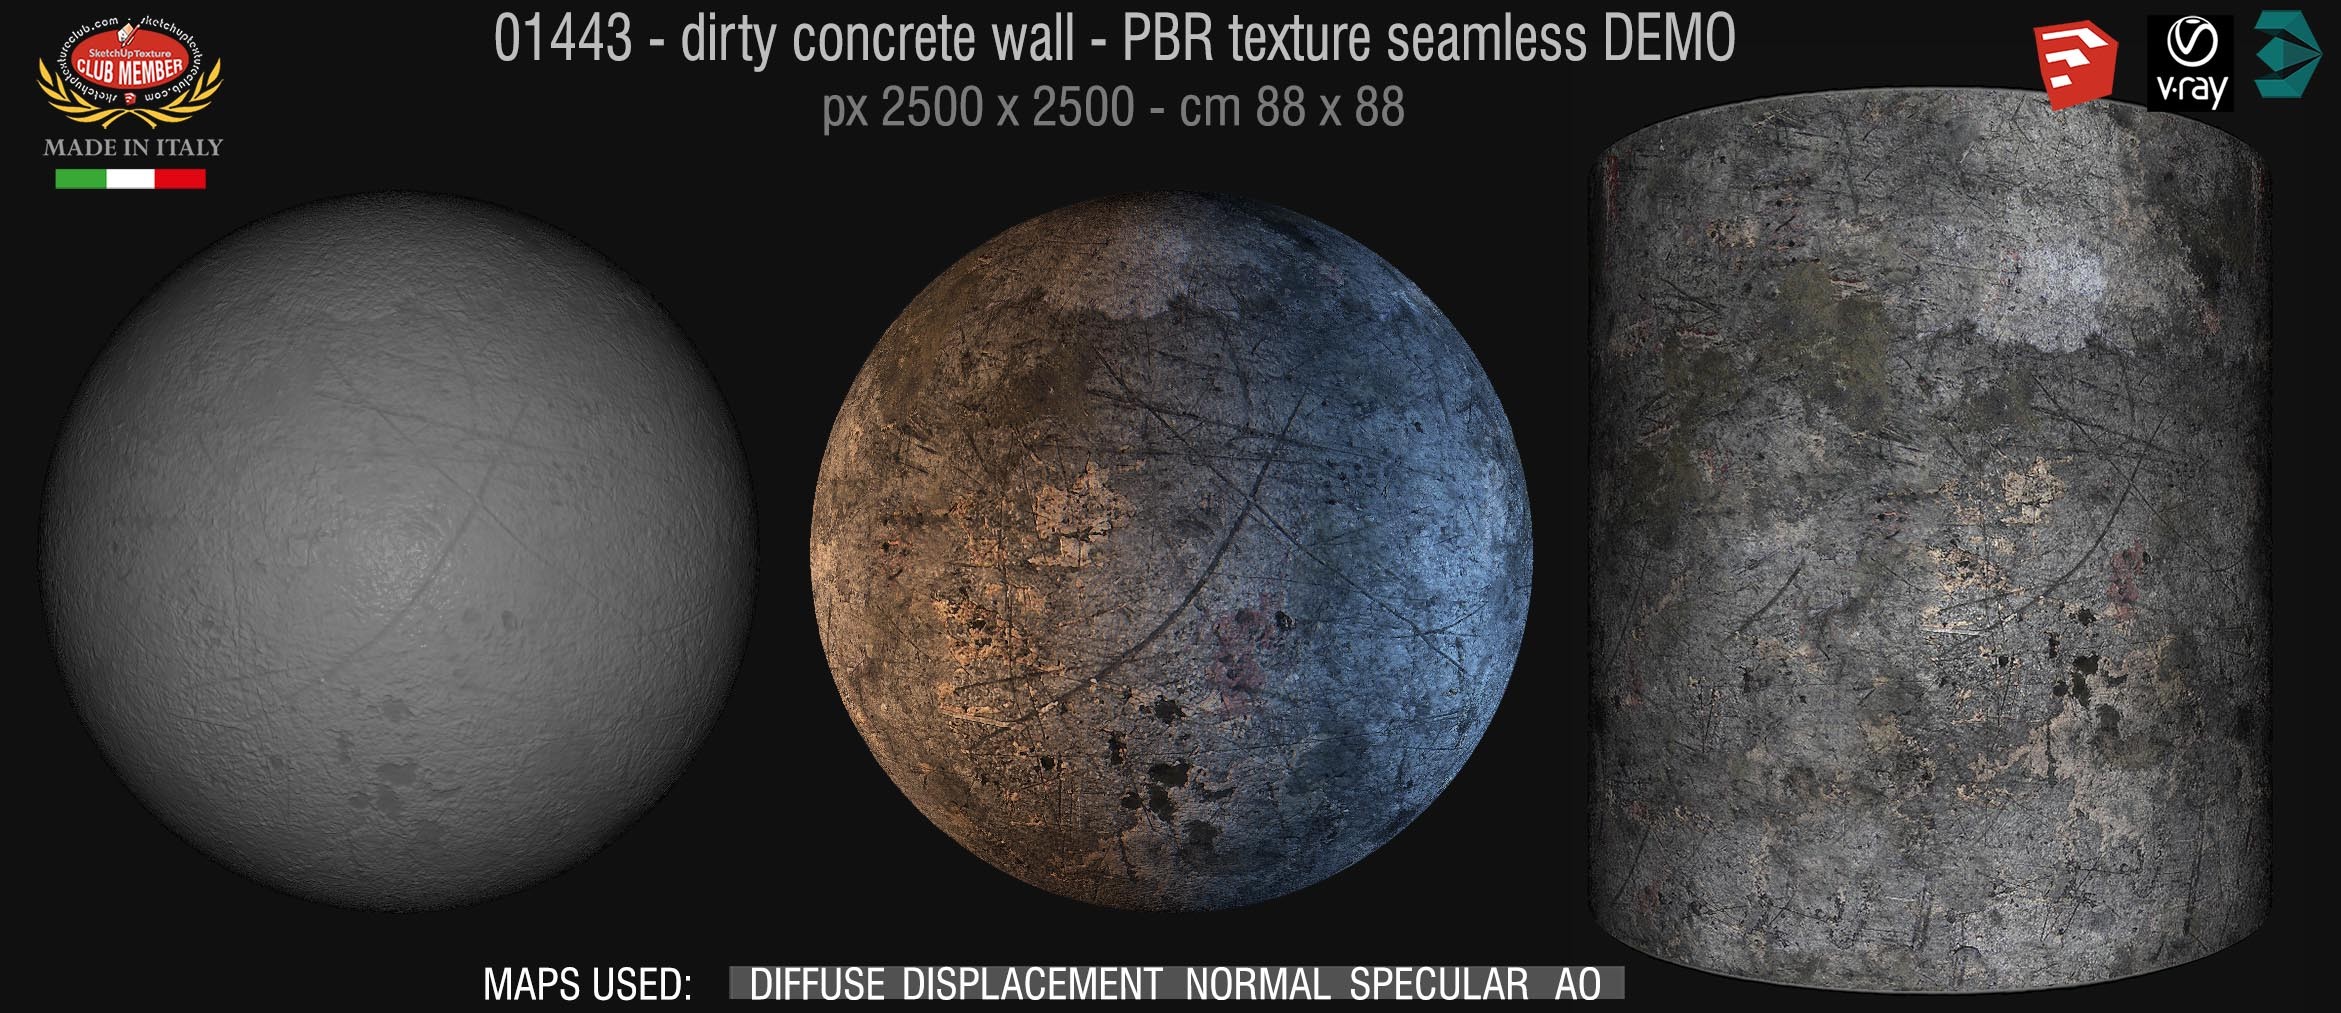 01443 Concrete bare dirty wall PBR texture seamless DEMO